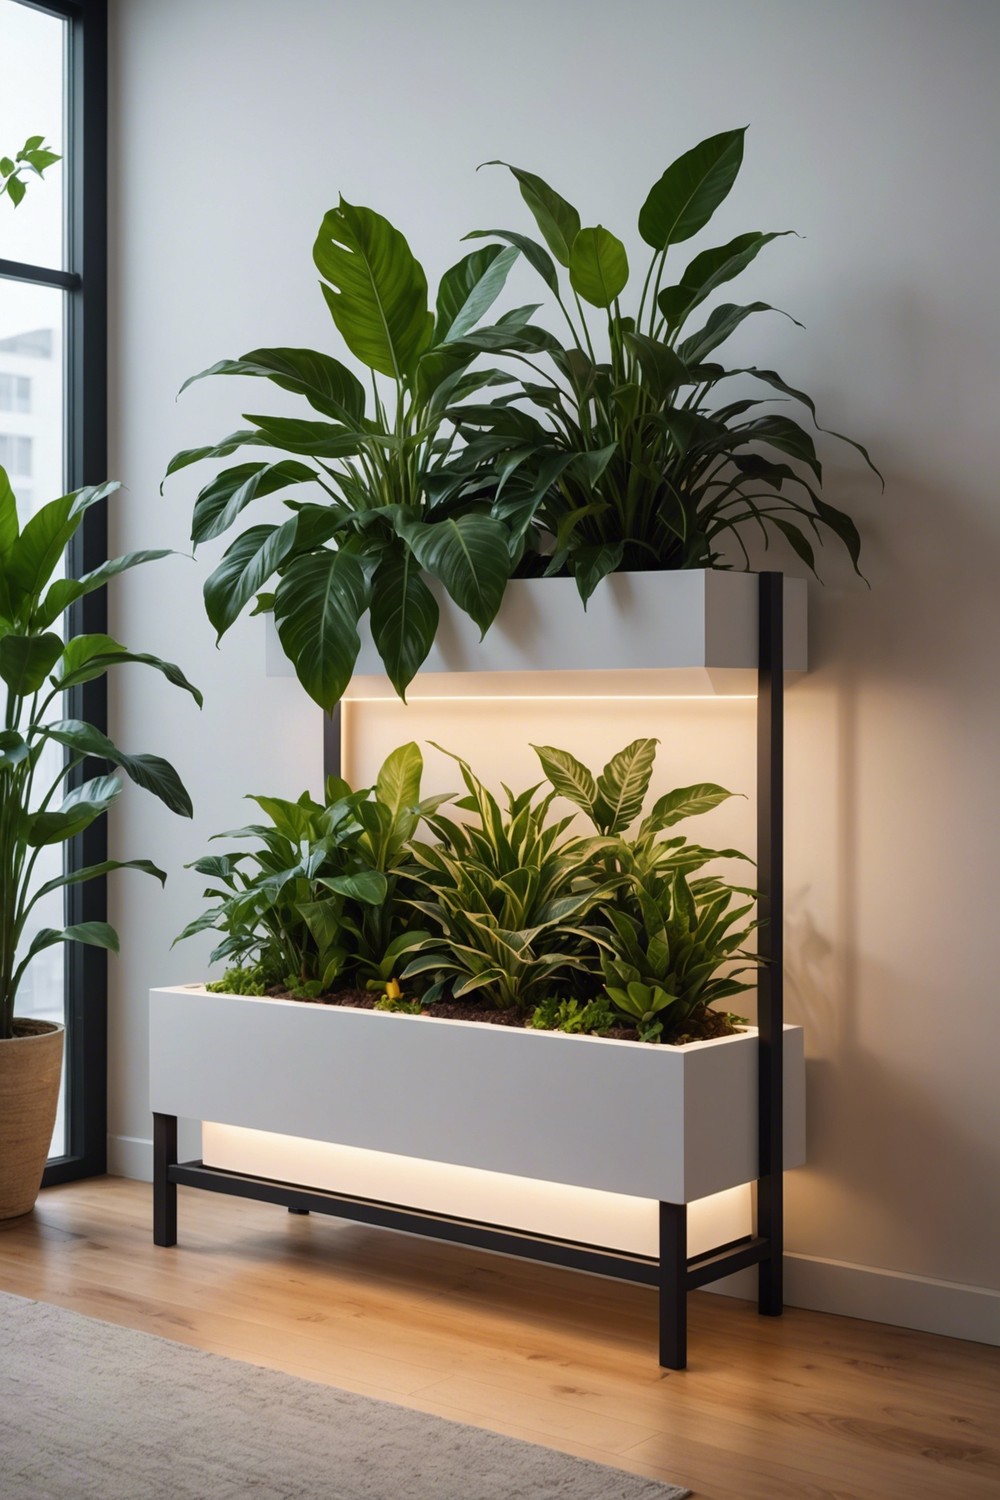 Planter Box with LED Lighting for Indoor Plants